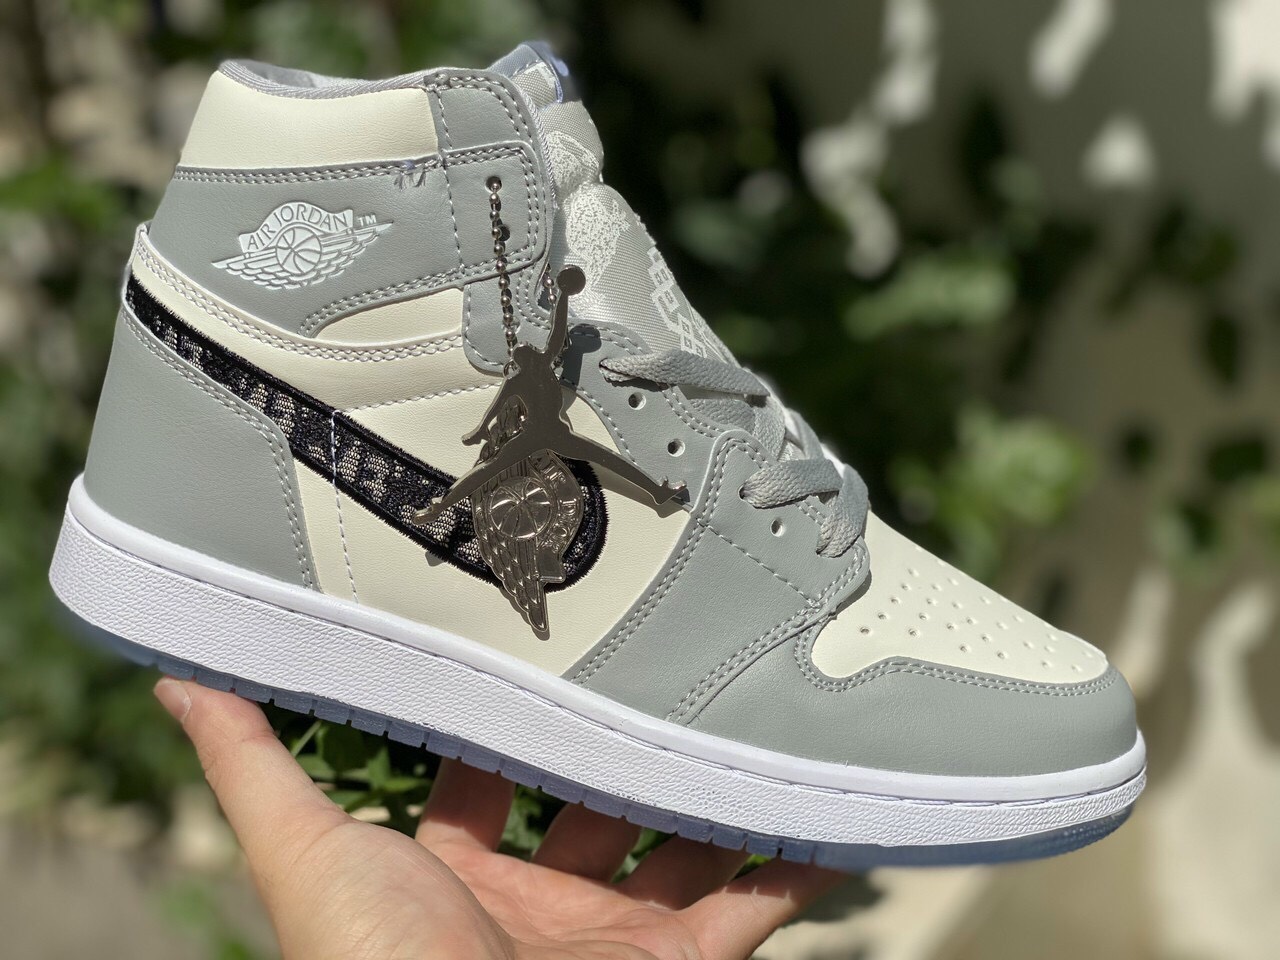 Fake Dior X Air Jordan 1 shoes seized in massive 43M Texas bust This is  how counterfeit footwear were found